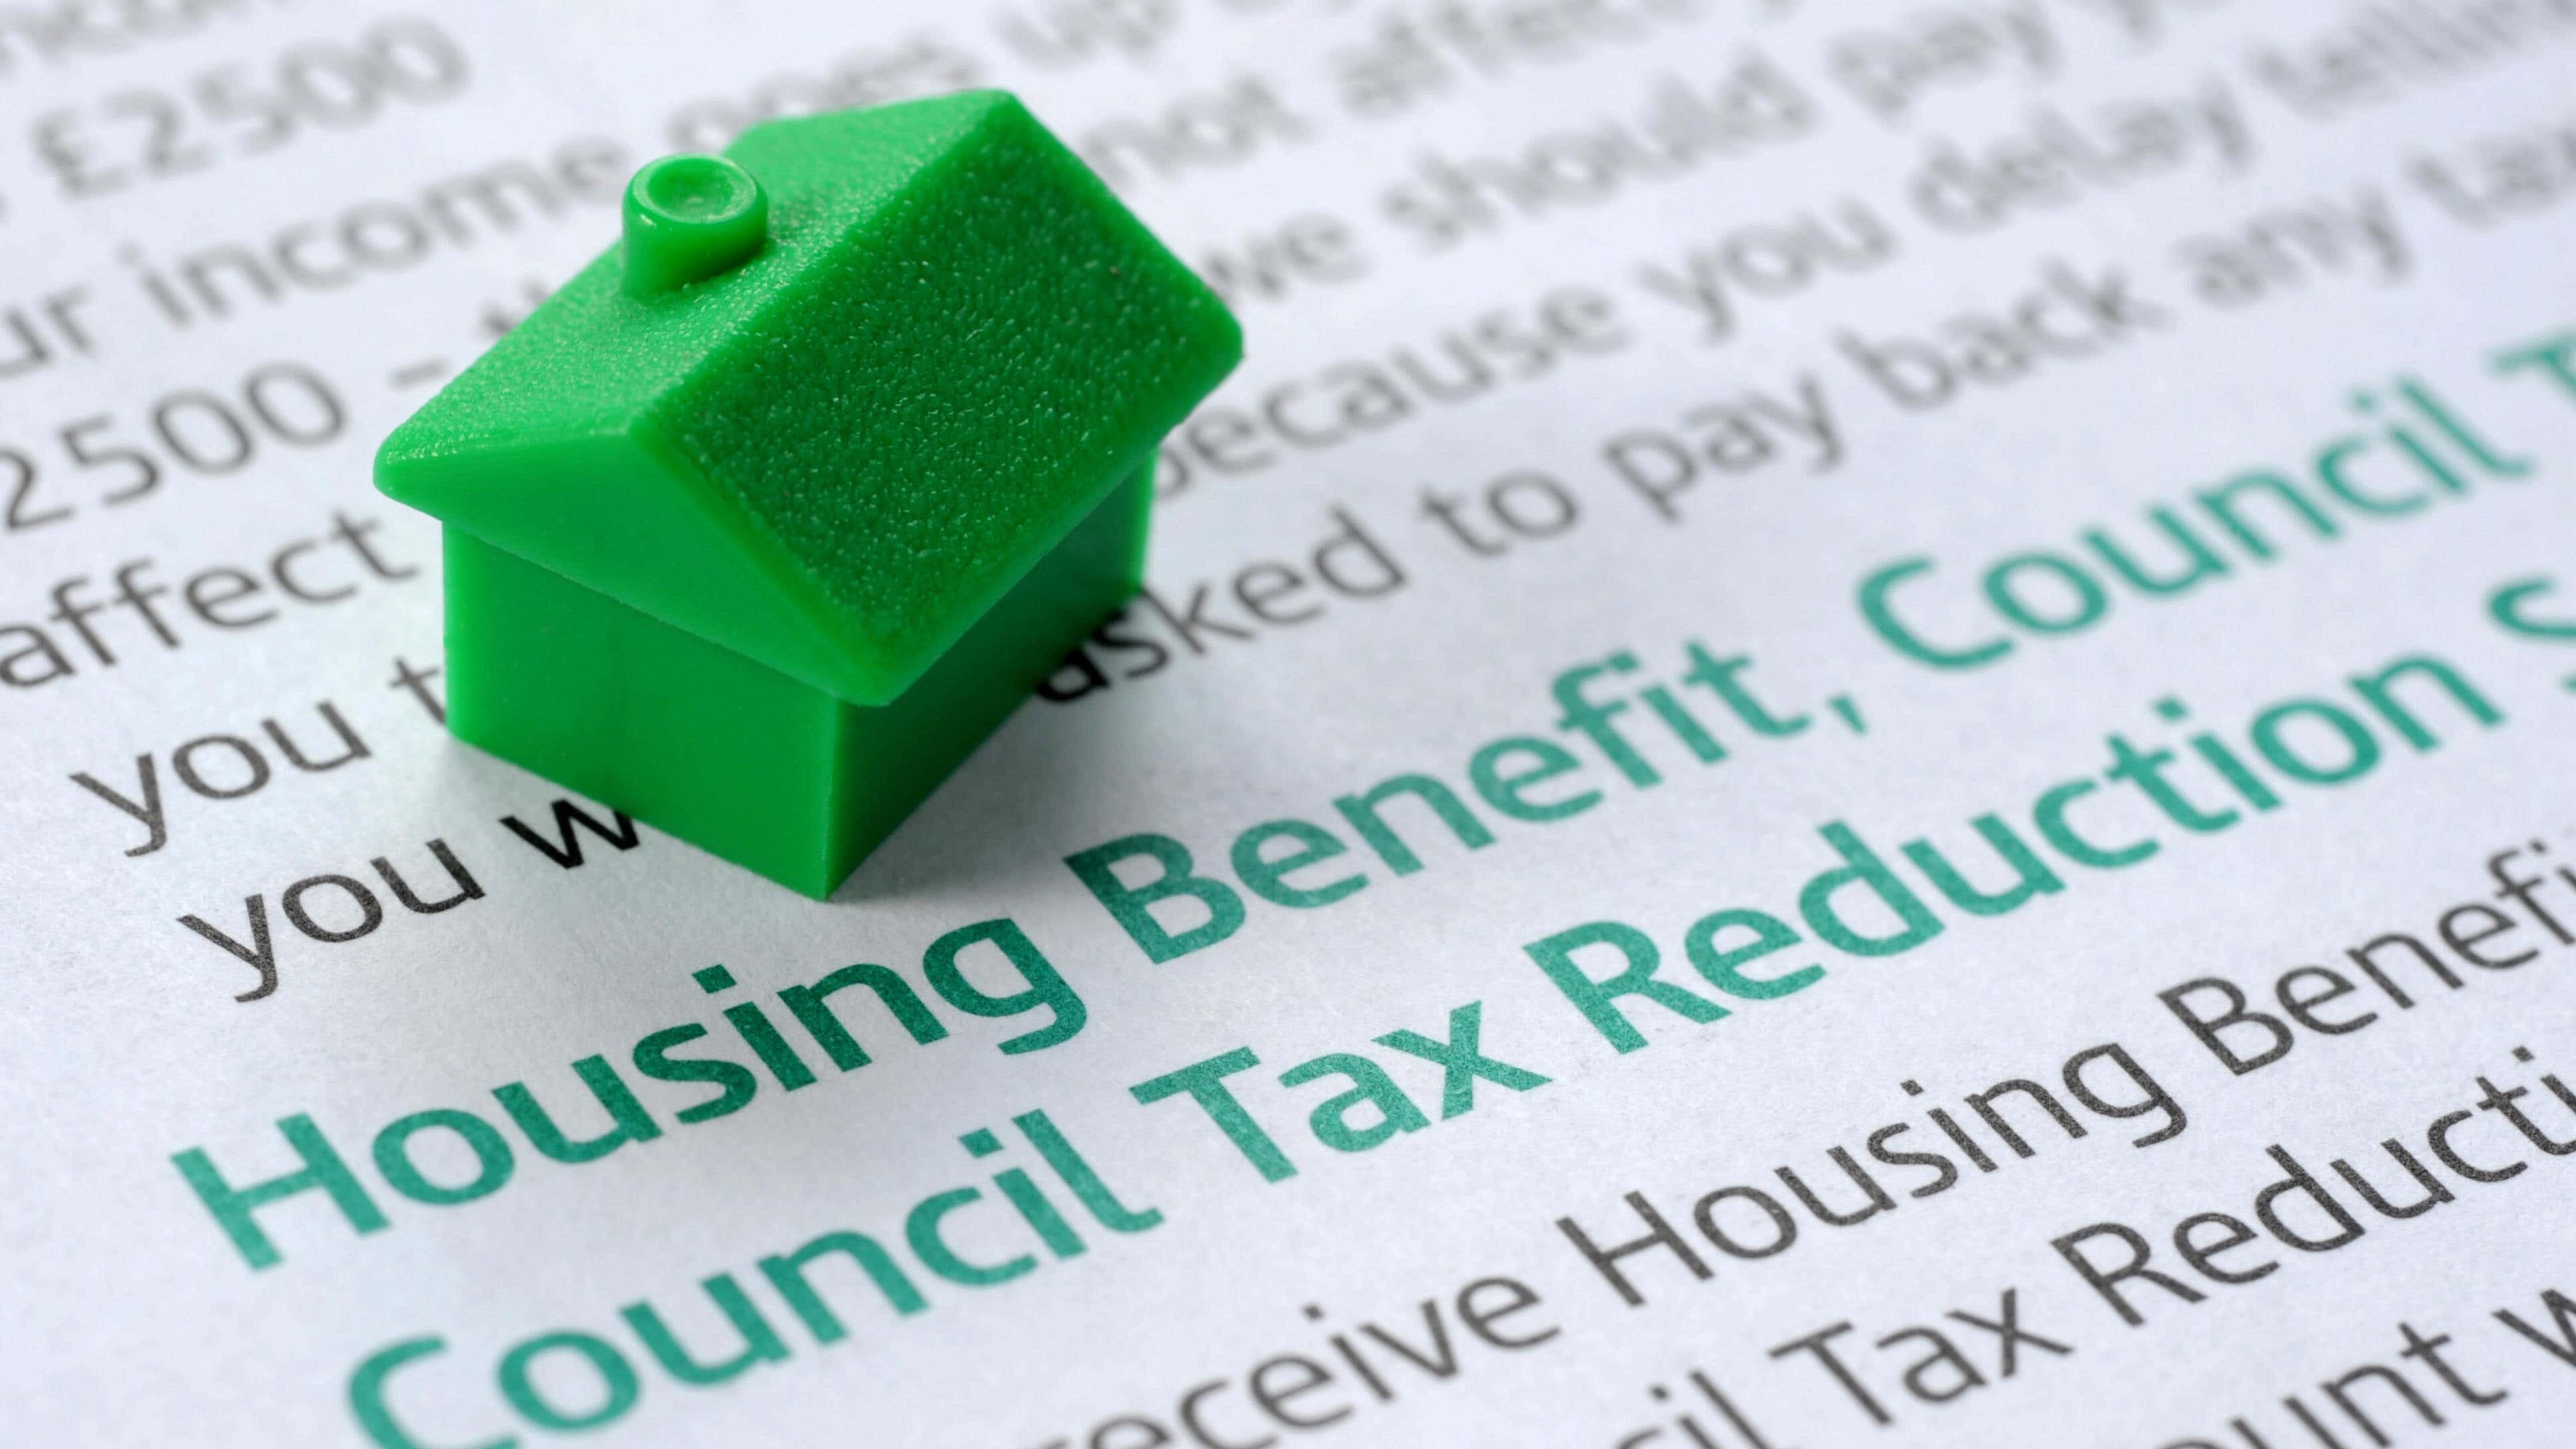 Housing allowance and benefits rises in line with inflation have been welcomed by charities and campaigners (Alamy/PA)